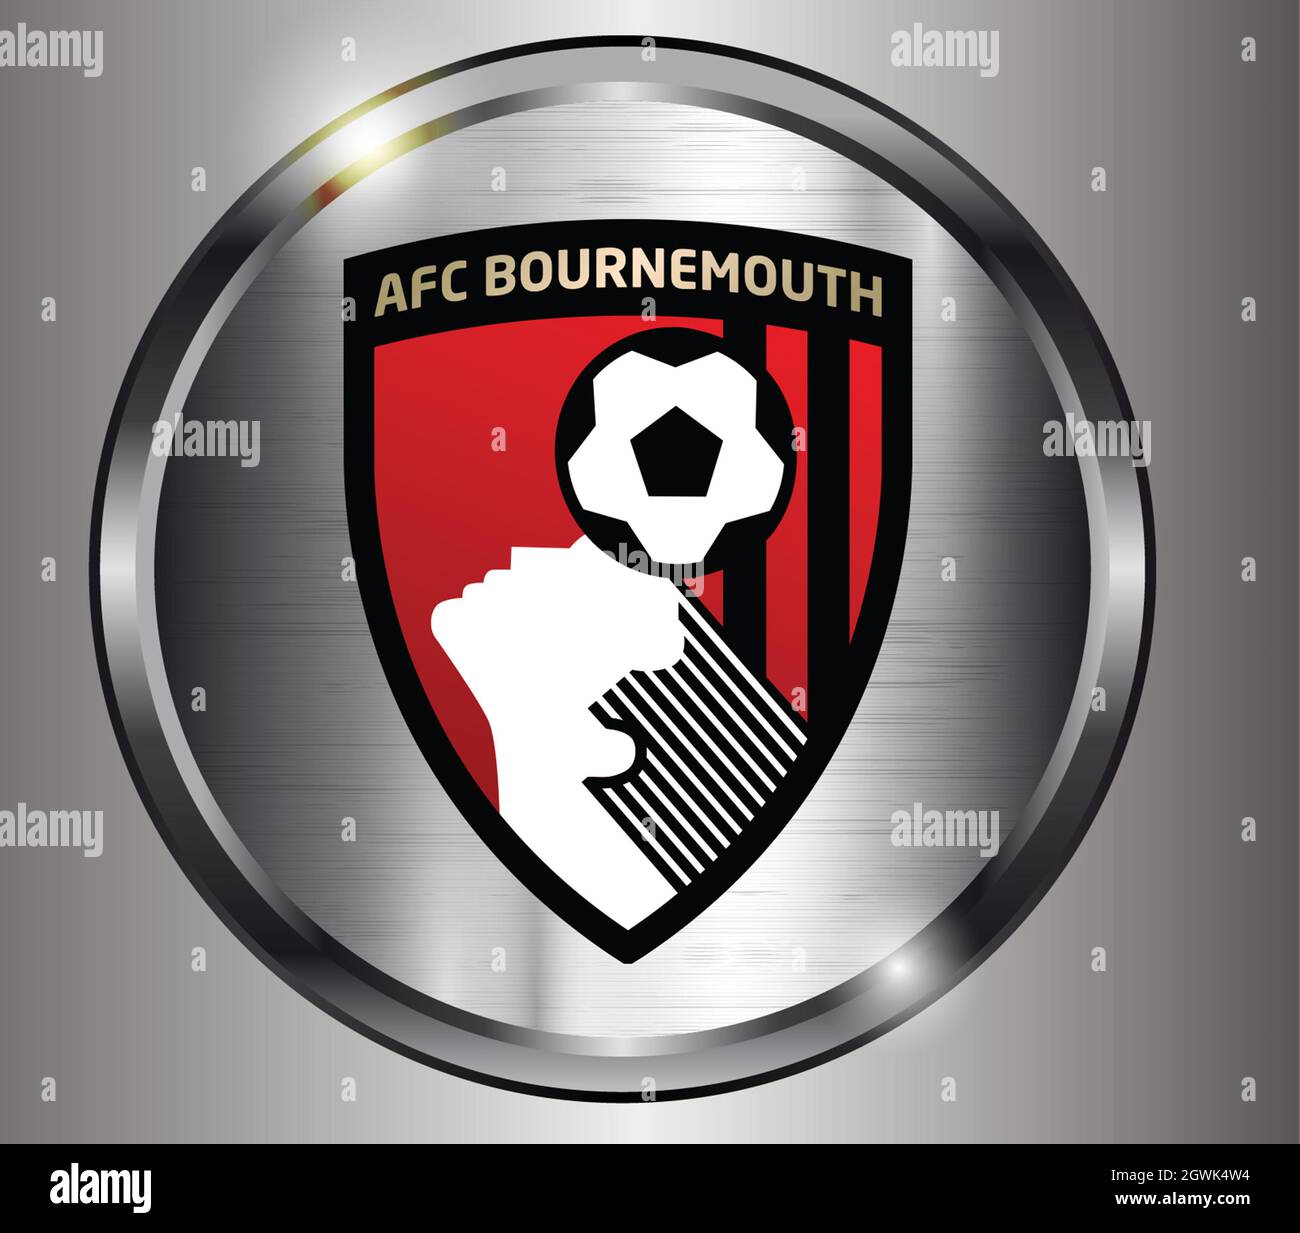 Coat of arms AFC Bournemouth, a football club from England Stock Photo